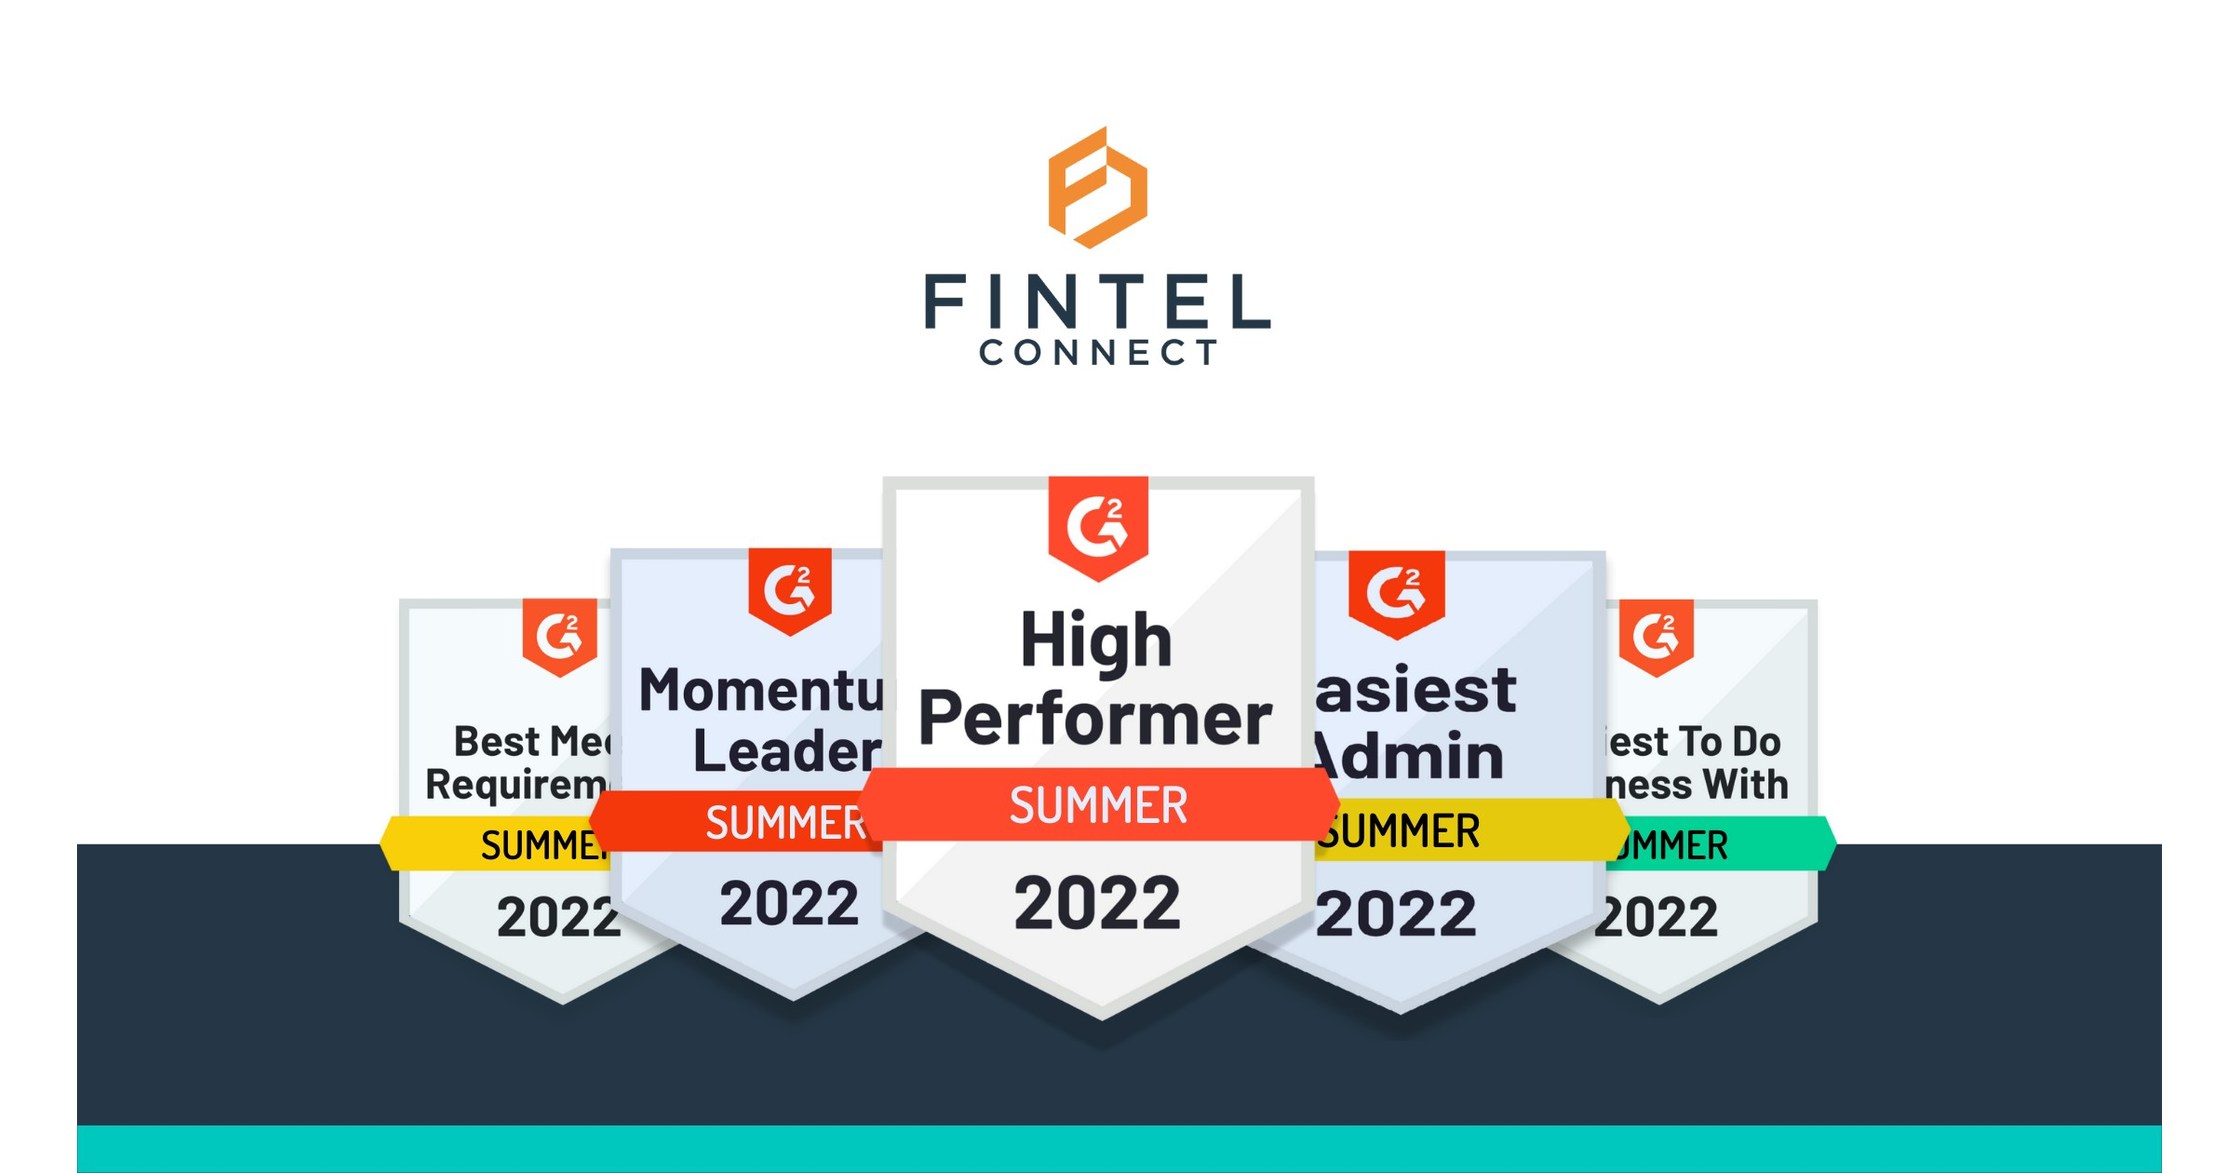 Fintel Connect Named “High Performer” in G2’s 2022 Summer Report of Technology Solutions